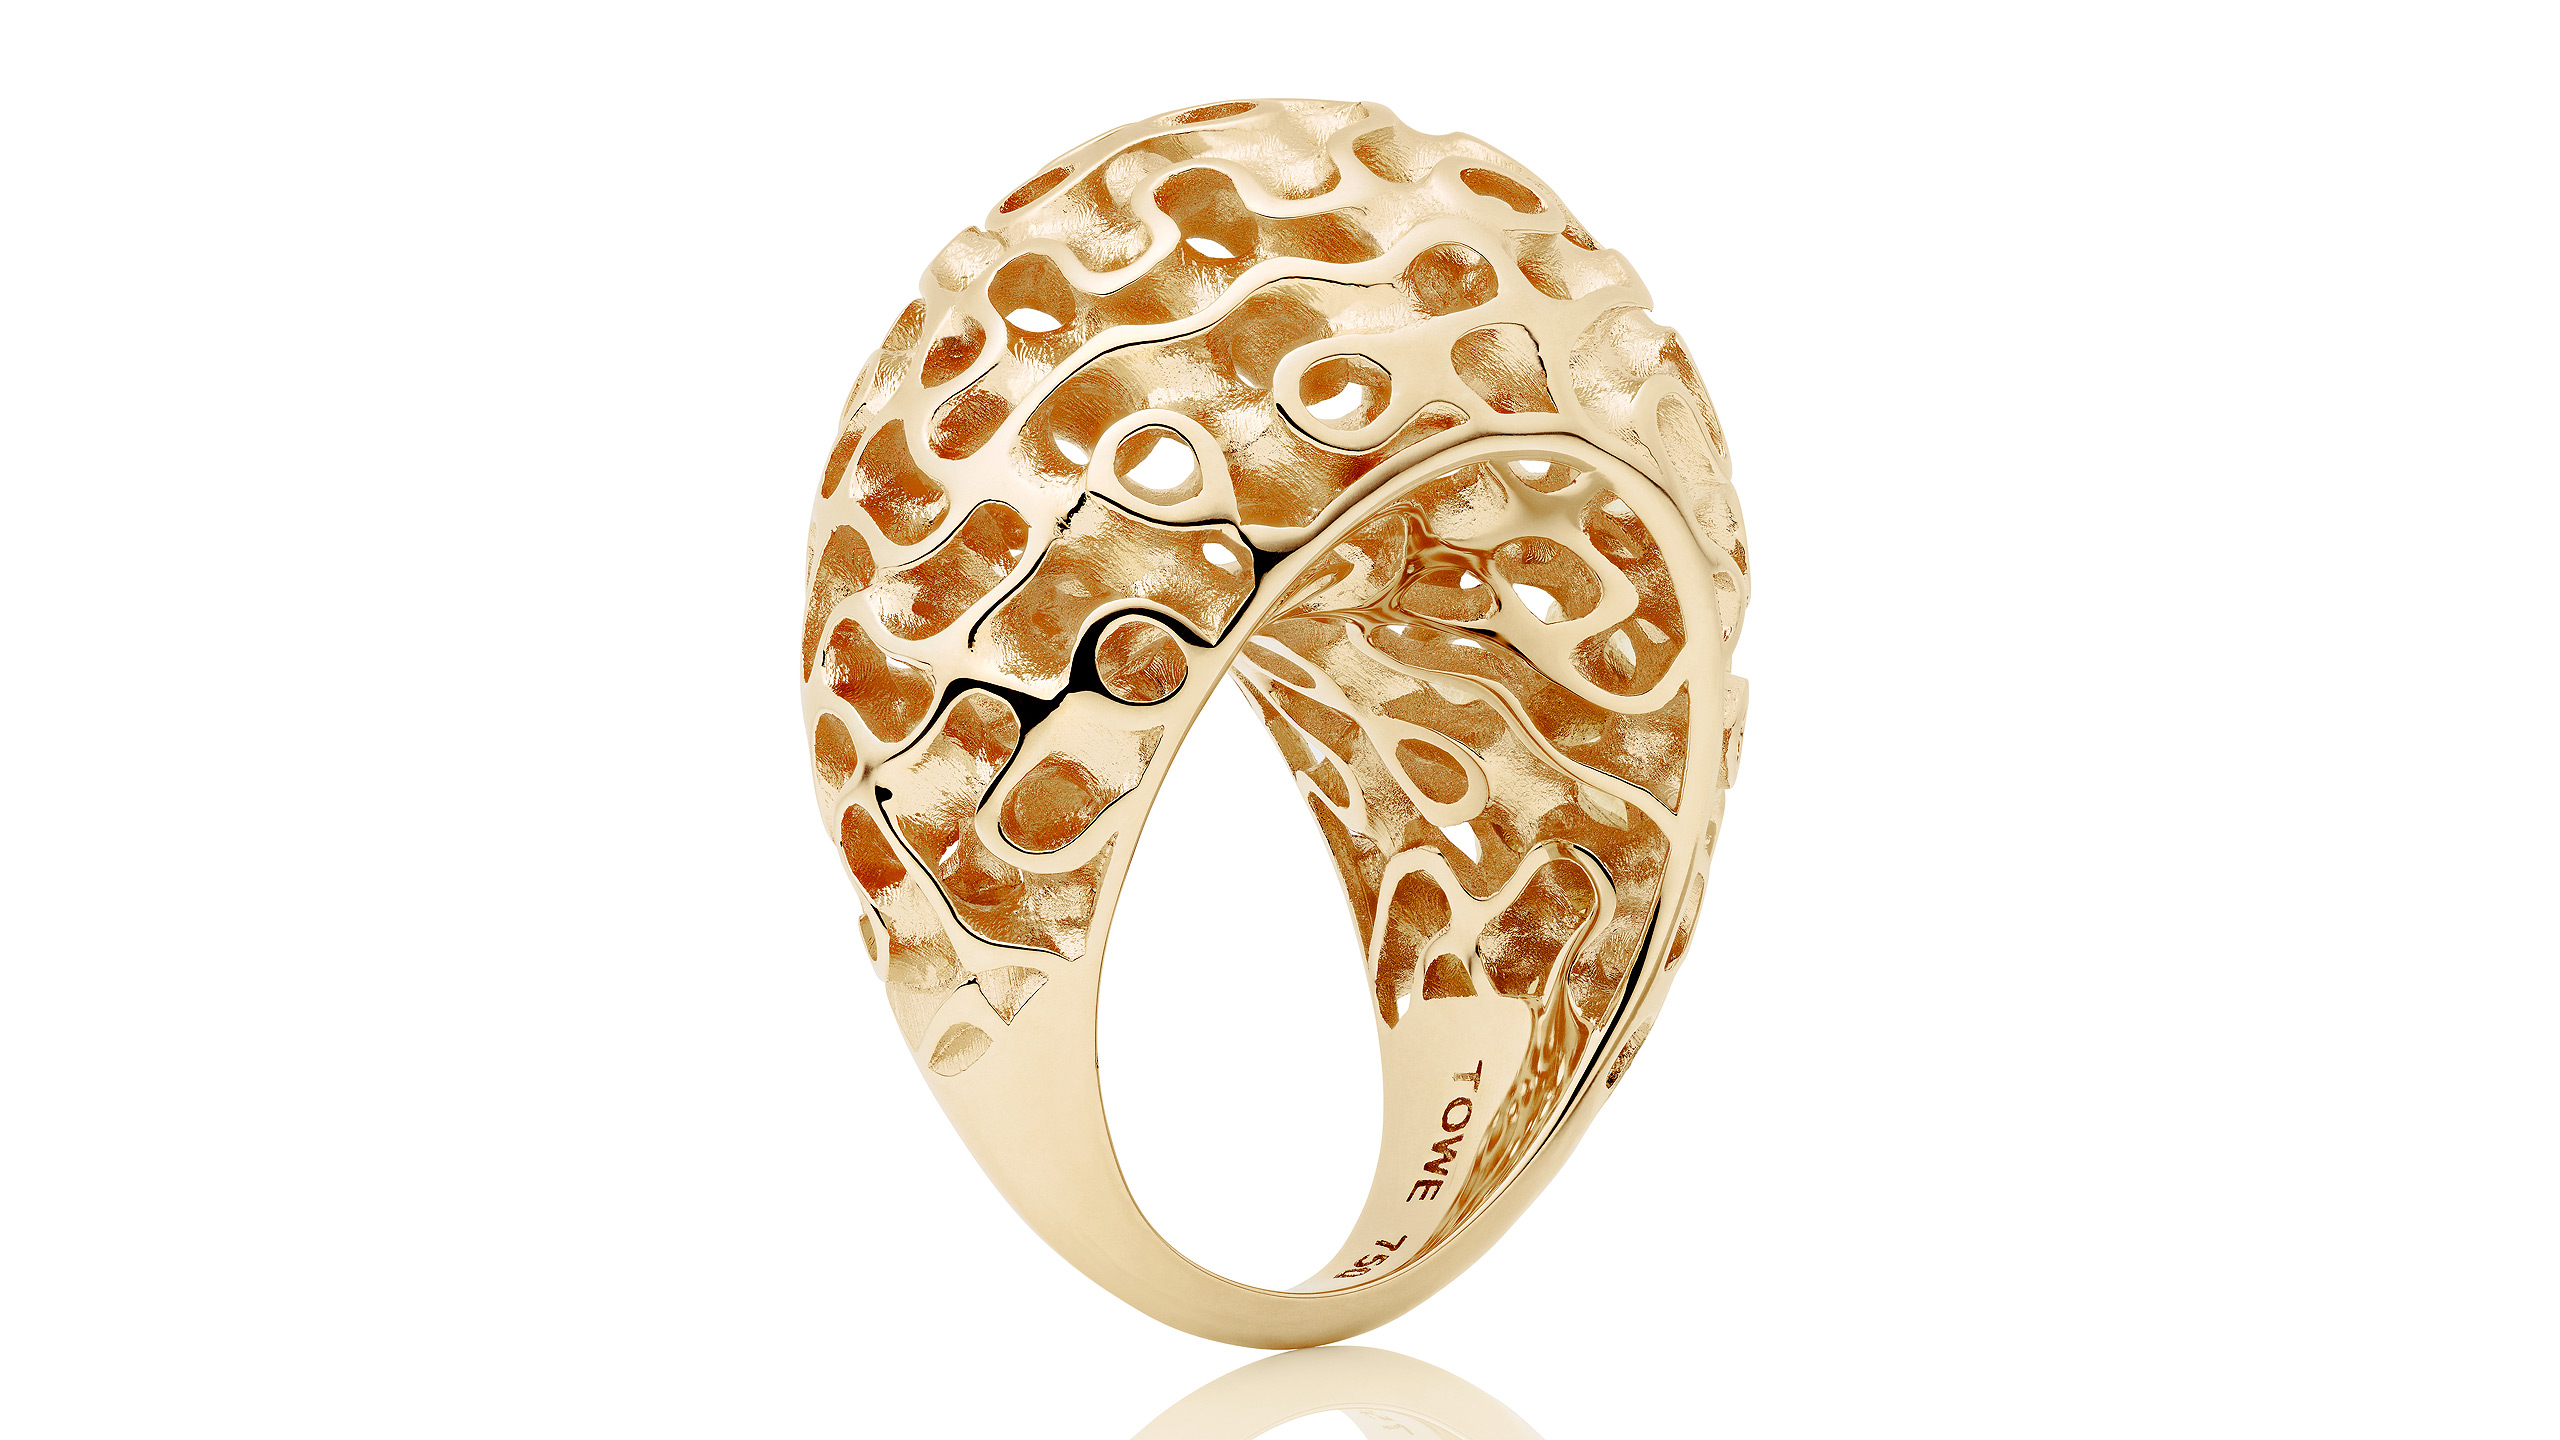 https://towejewels.com/wp-content/uploads/2015/05/DUNE_SILK_ring_Yellow_G_halvprofil_ny_OK_2560_1440_overview_web.jpg